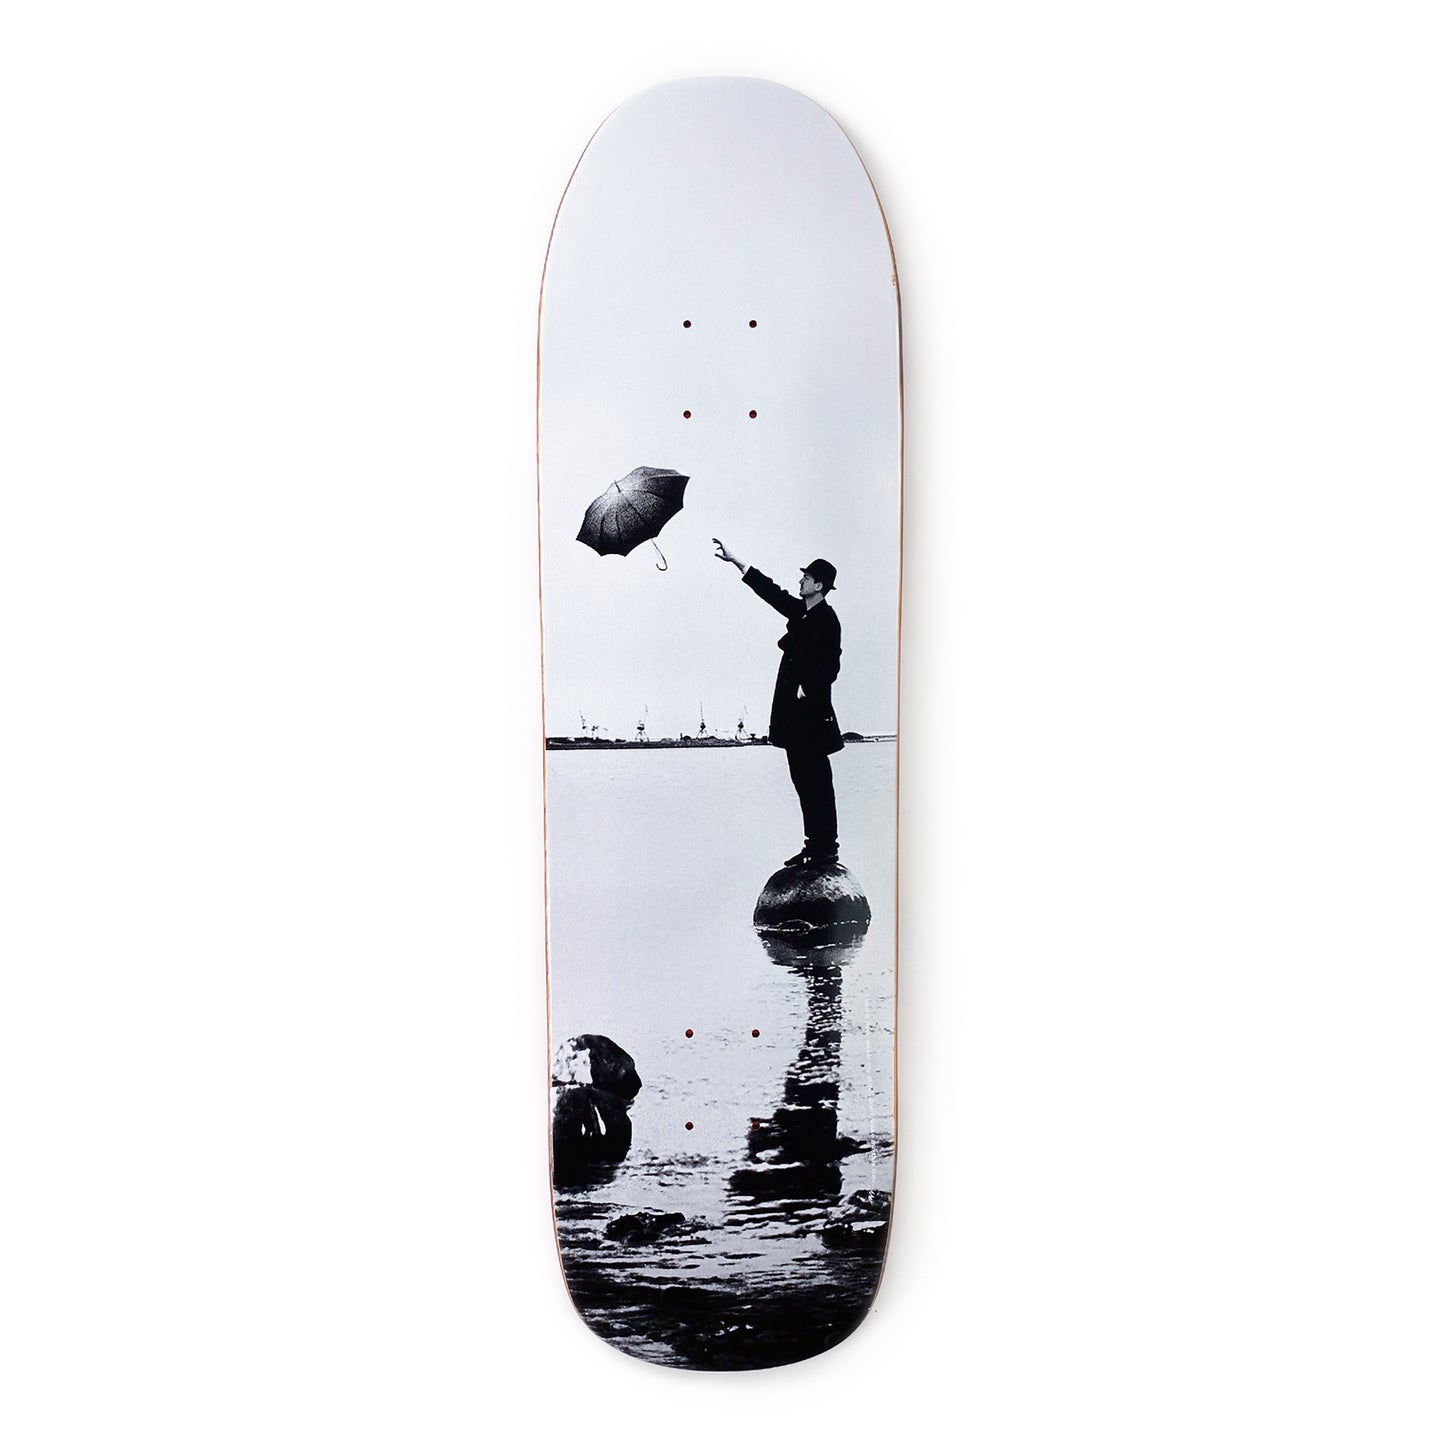 Polar - 9.25" - I Like It Here (Harbour) 1991 Team Deck - Prime Delux Store